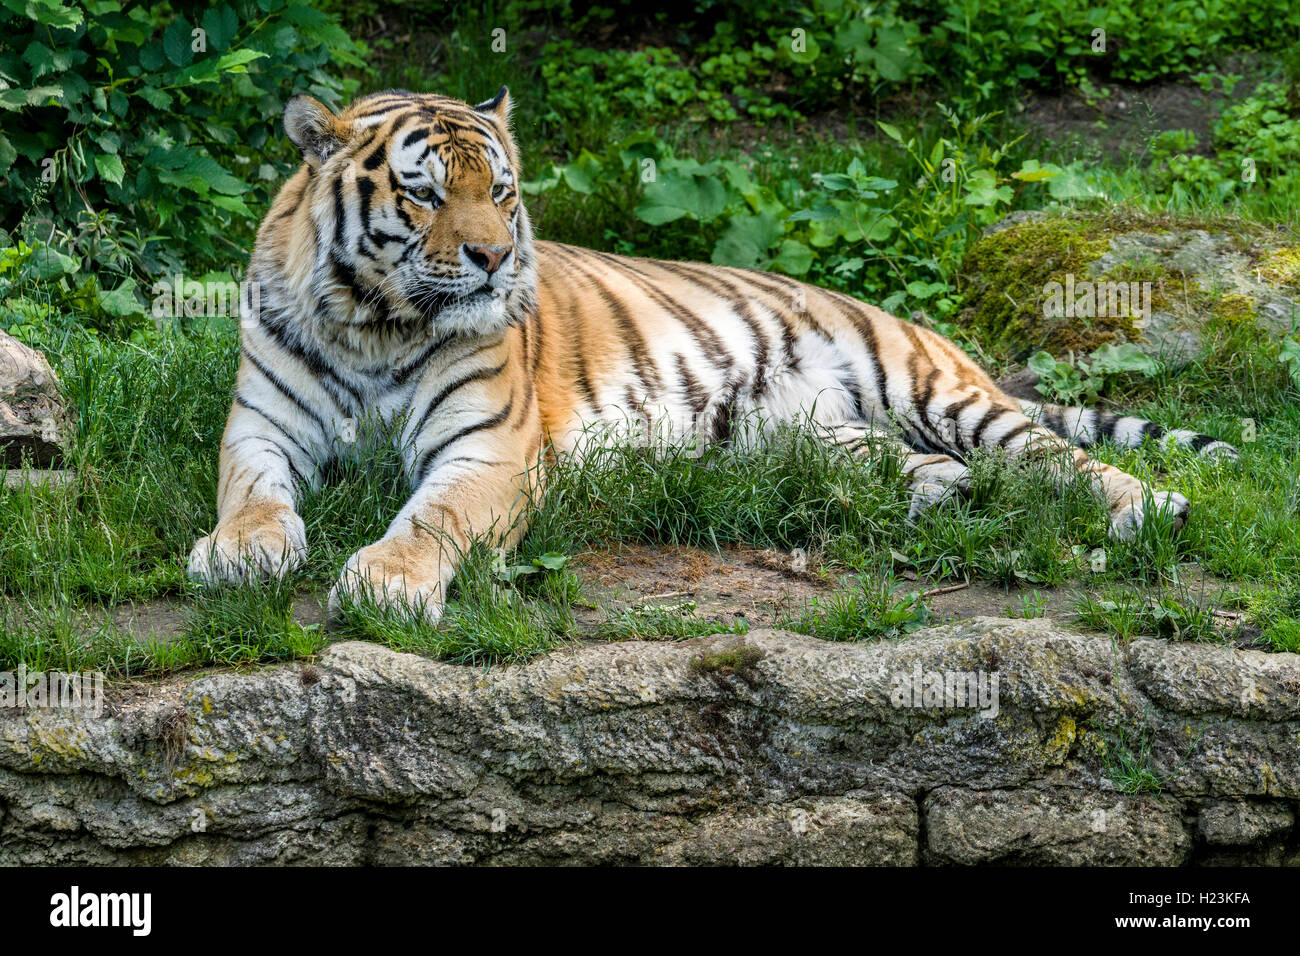 Amur Tiger (Panthera tigris altaica) is lying on the ground, captive, Leipzig, Saxony, Germany Stock Photo